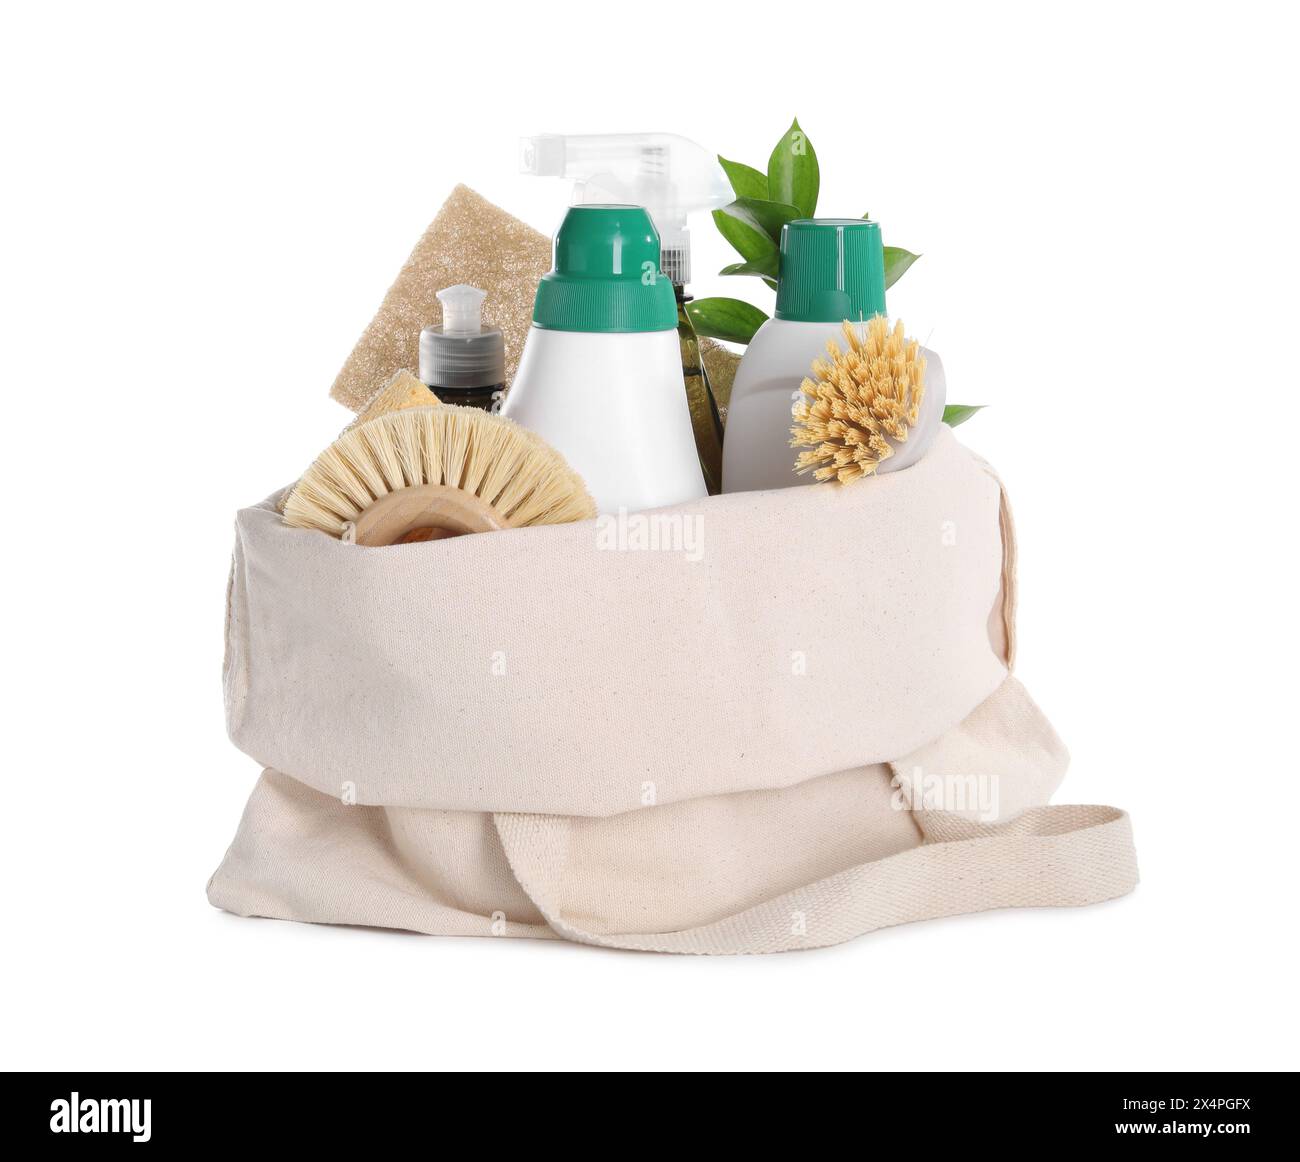 Bottles of cleaning product, brushes, sponges and green leaves in eco bag isolated on white Stock Photo